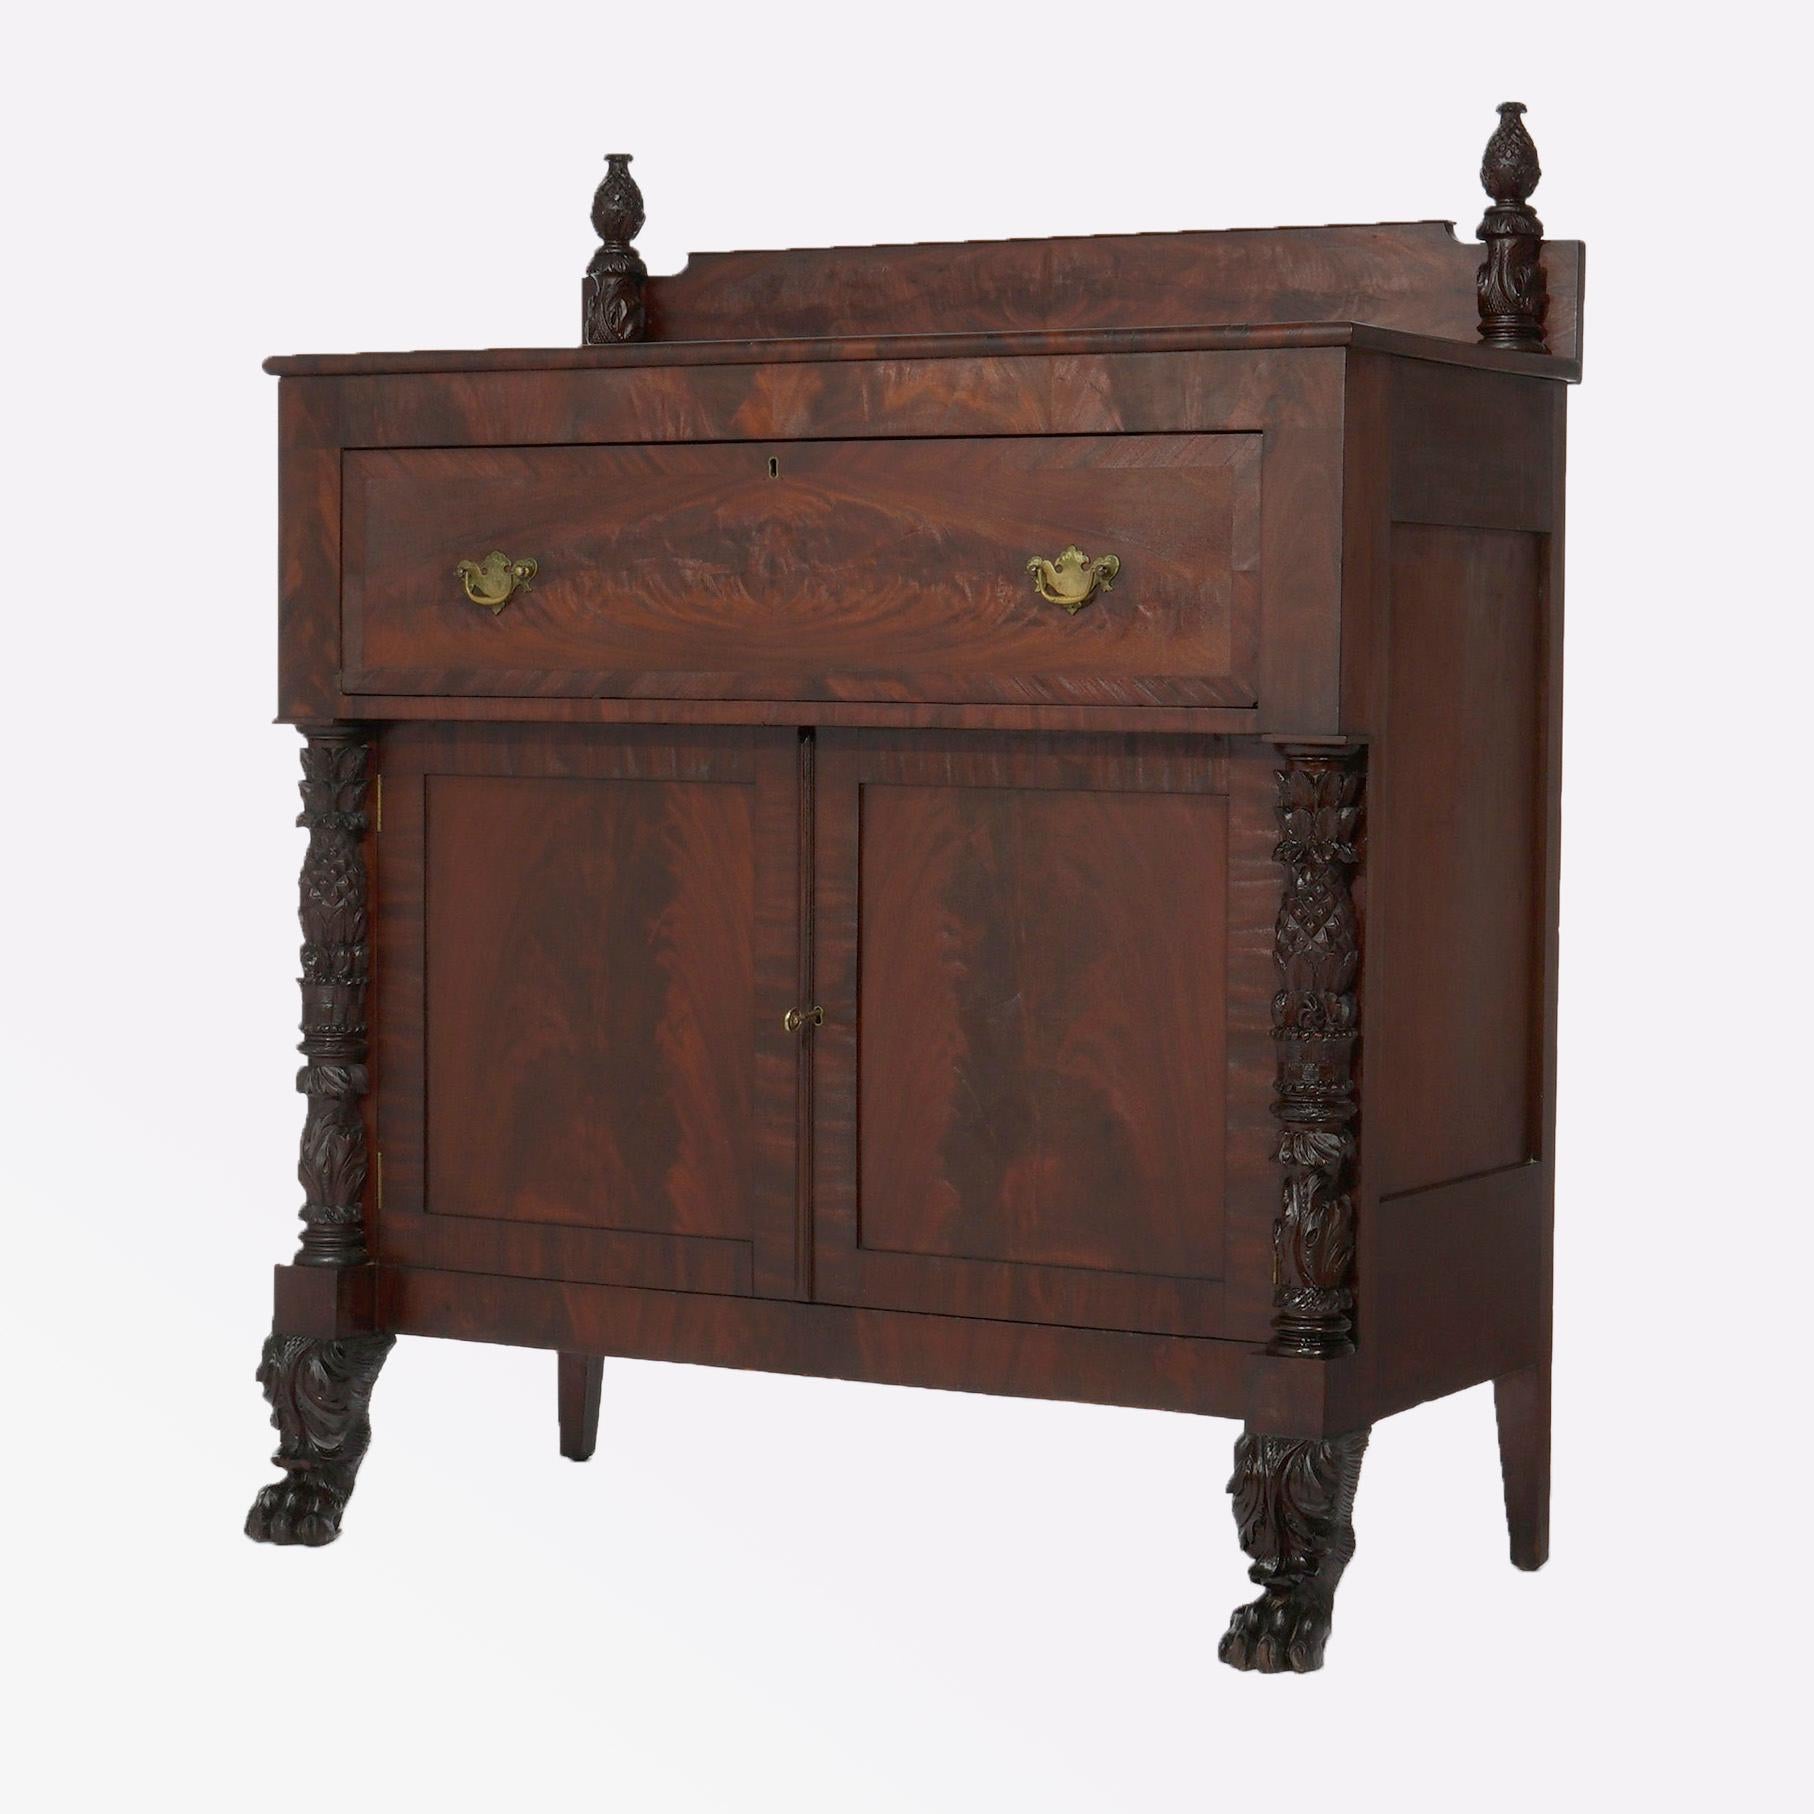 An antique American Empire Greco linen press sideboard offers deeply striated flame mahogany construction with backsplash having flanking finials over case with deep upper drawer surmounting double door lower cabinet and having flanking columns with